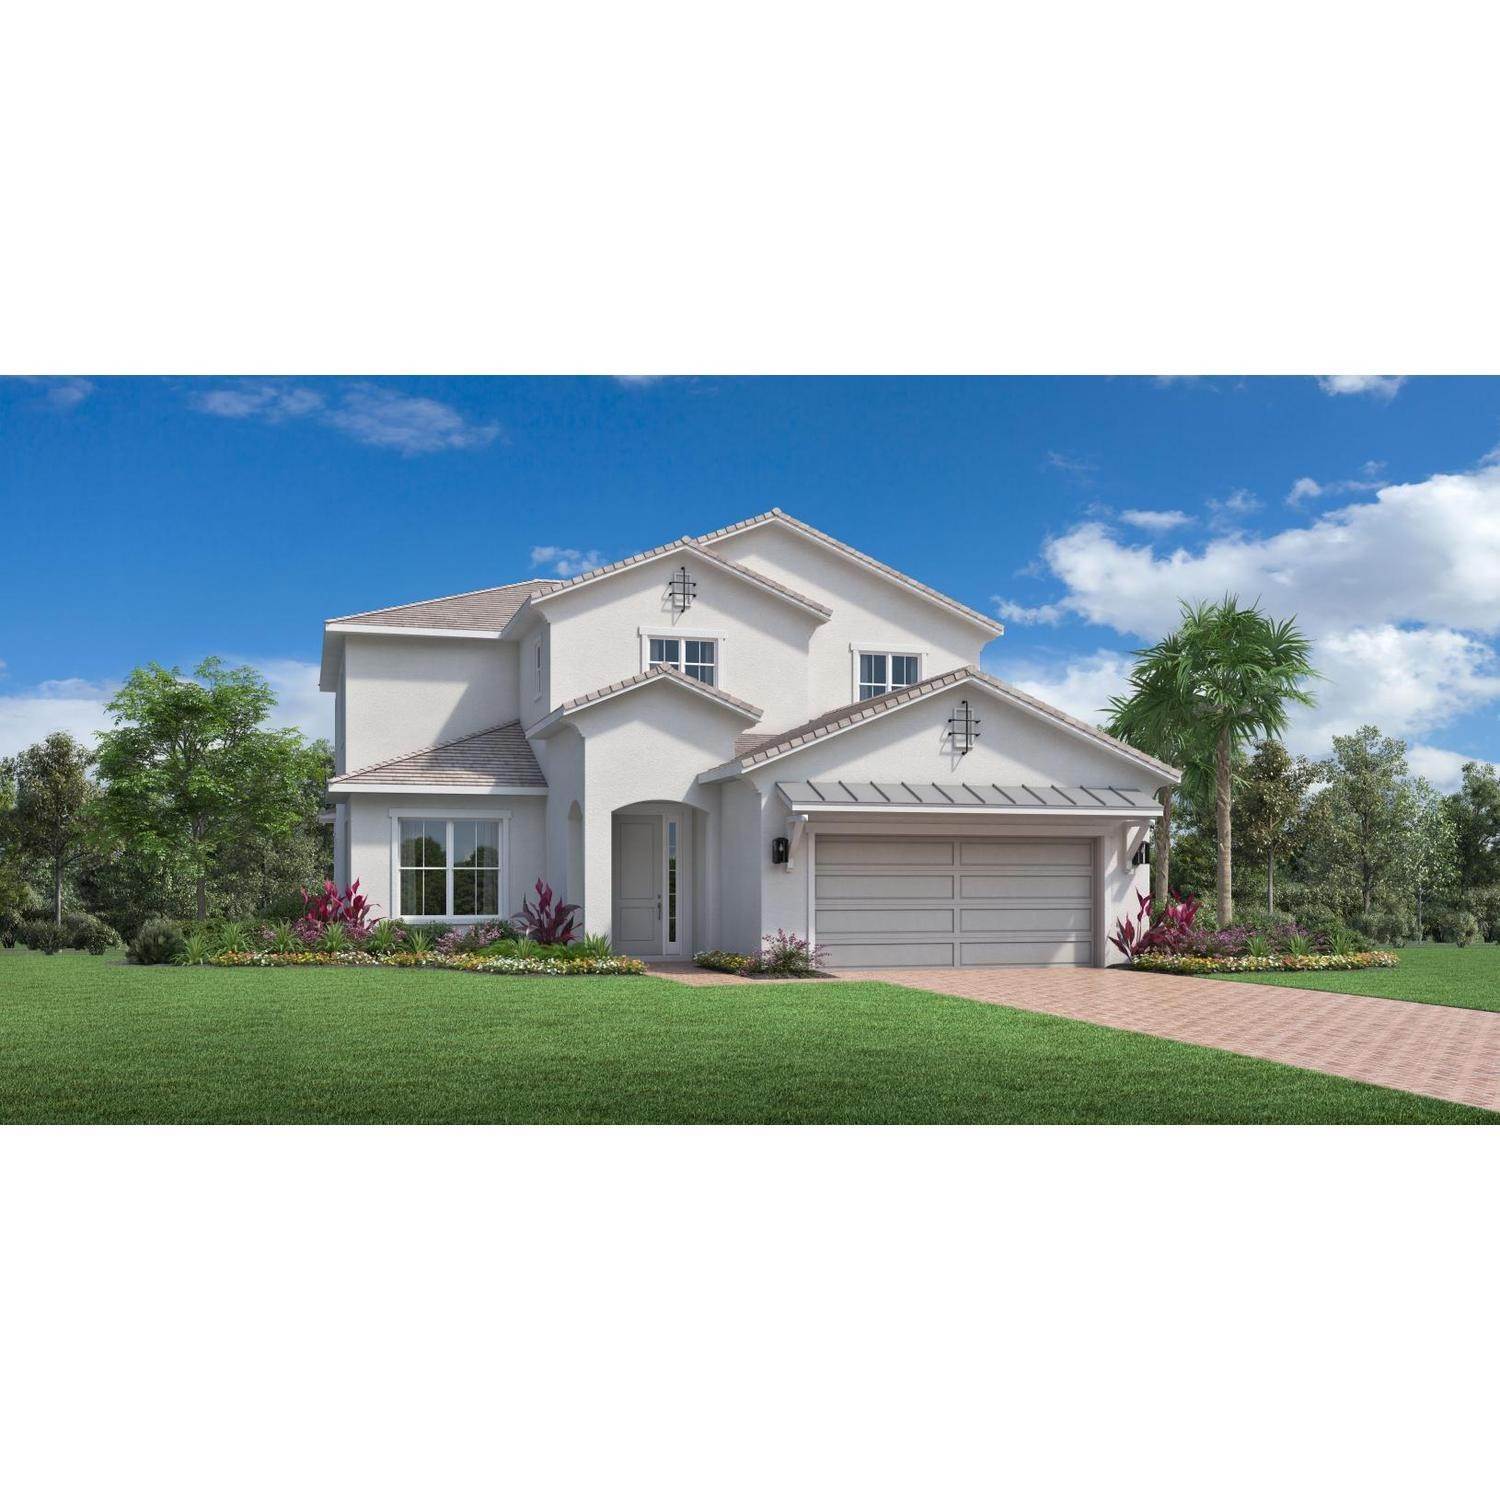 Single Family for Sale at Toll Brothers At Tesoro Club 126 SE Calmo Cir, Port St. Lucie, FL 34984